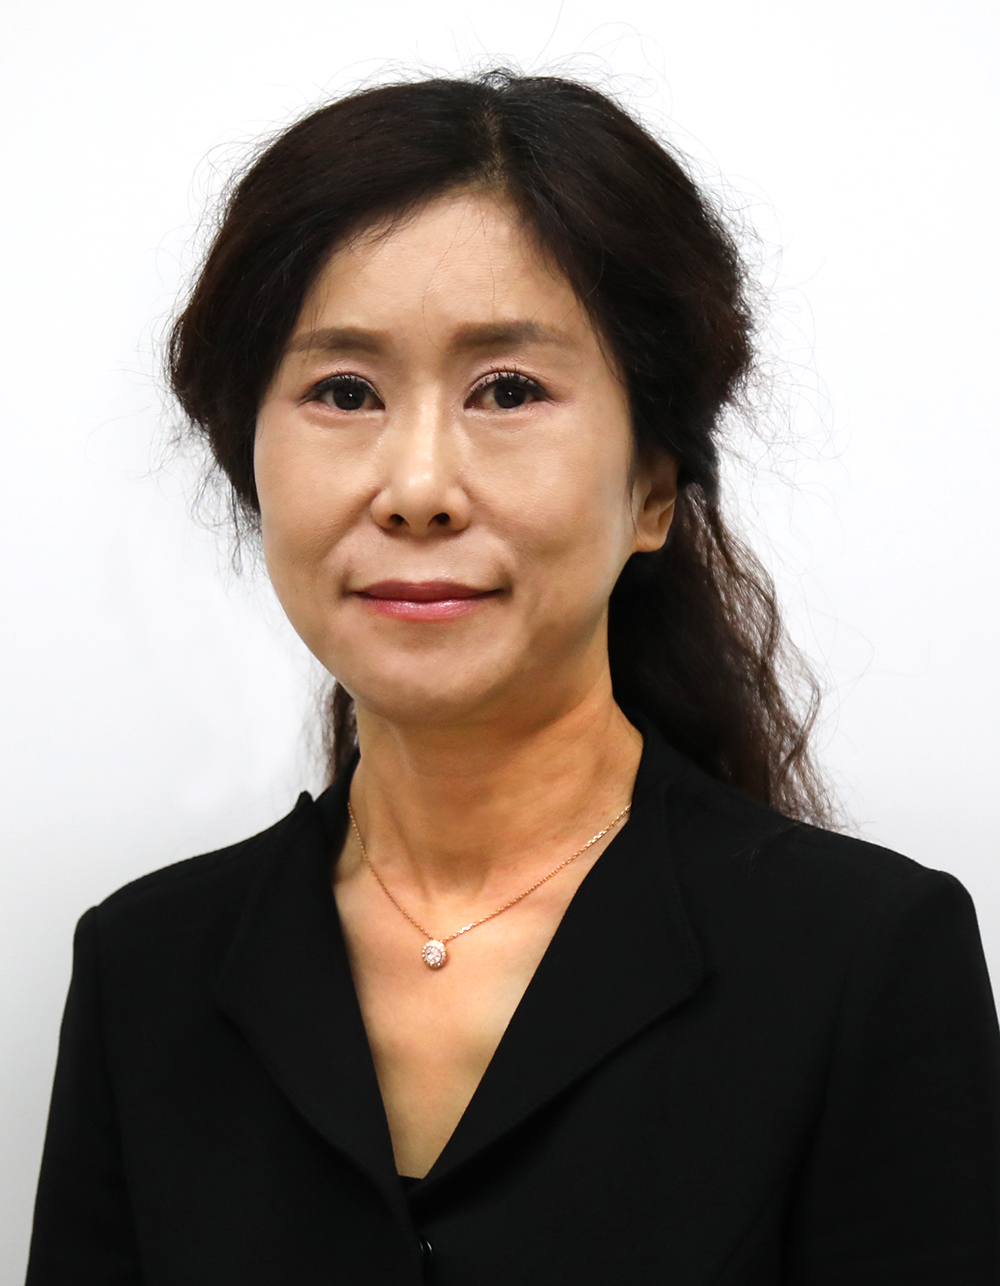 KIPO Deputy Director Appointed as Chair of the APEC Intellectual Property Rights Experts Group 